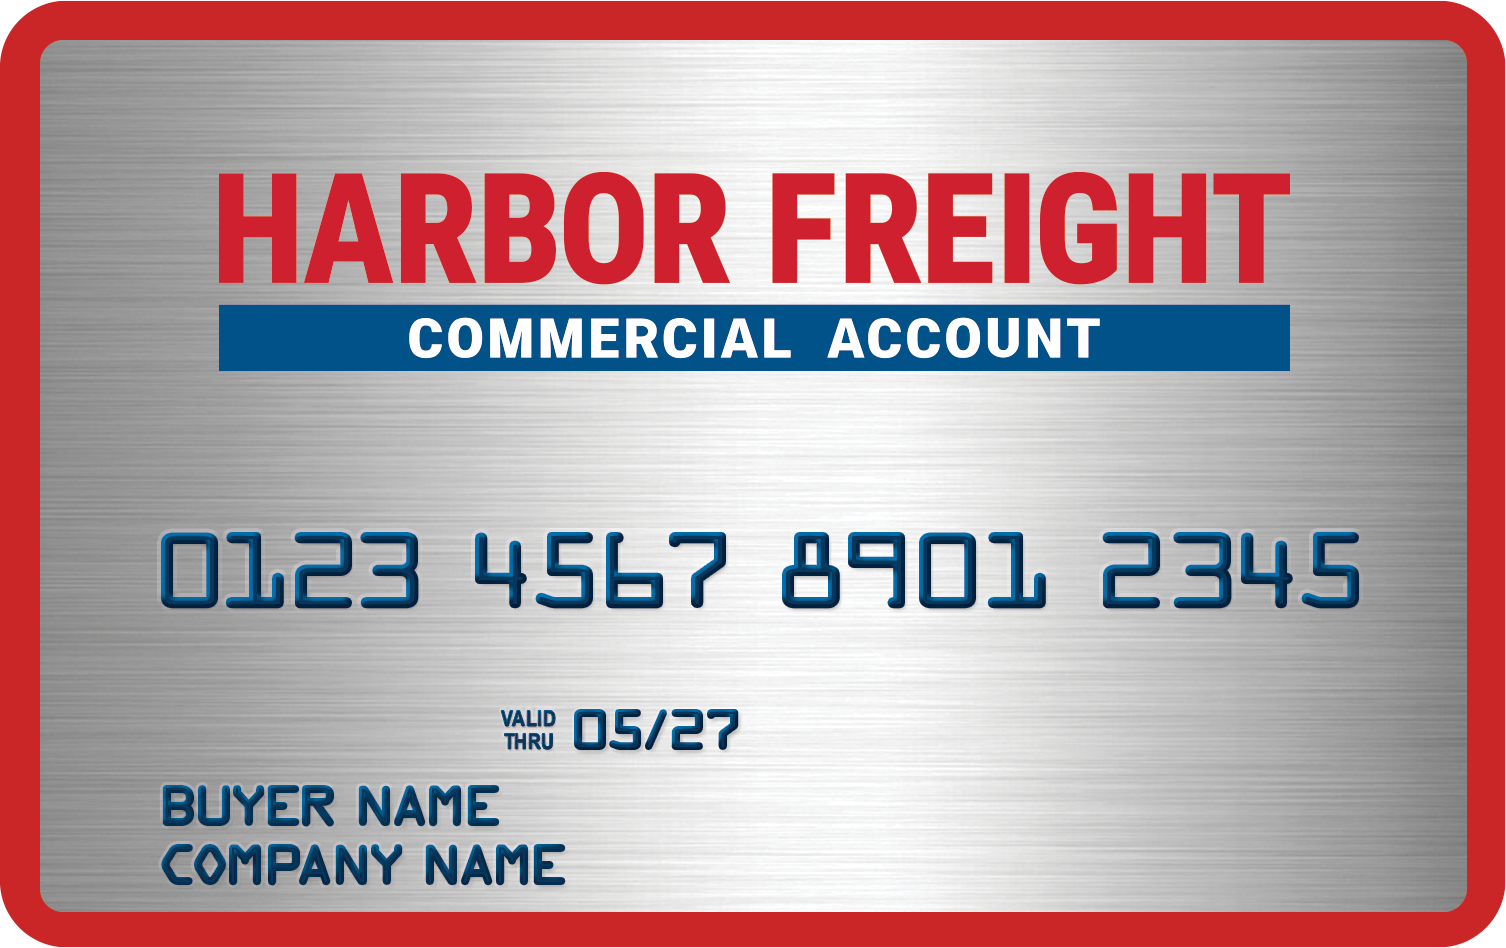 The Card That Works Hard - Harbor Freight Commercial Account - Apply In-Store or Online